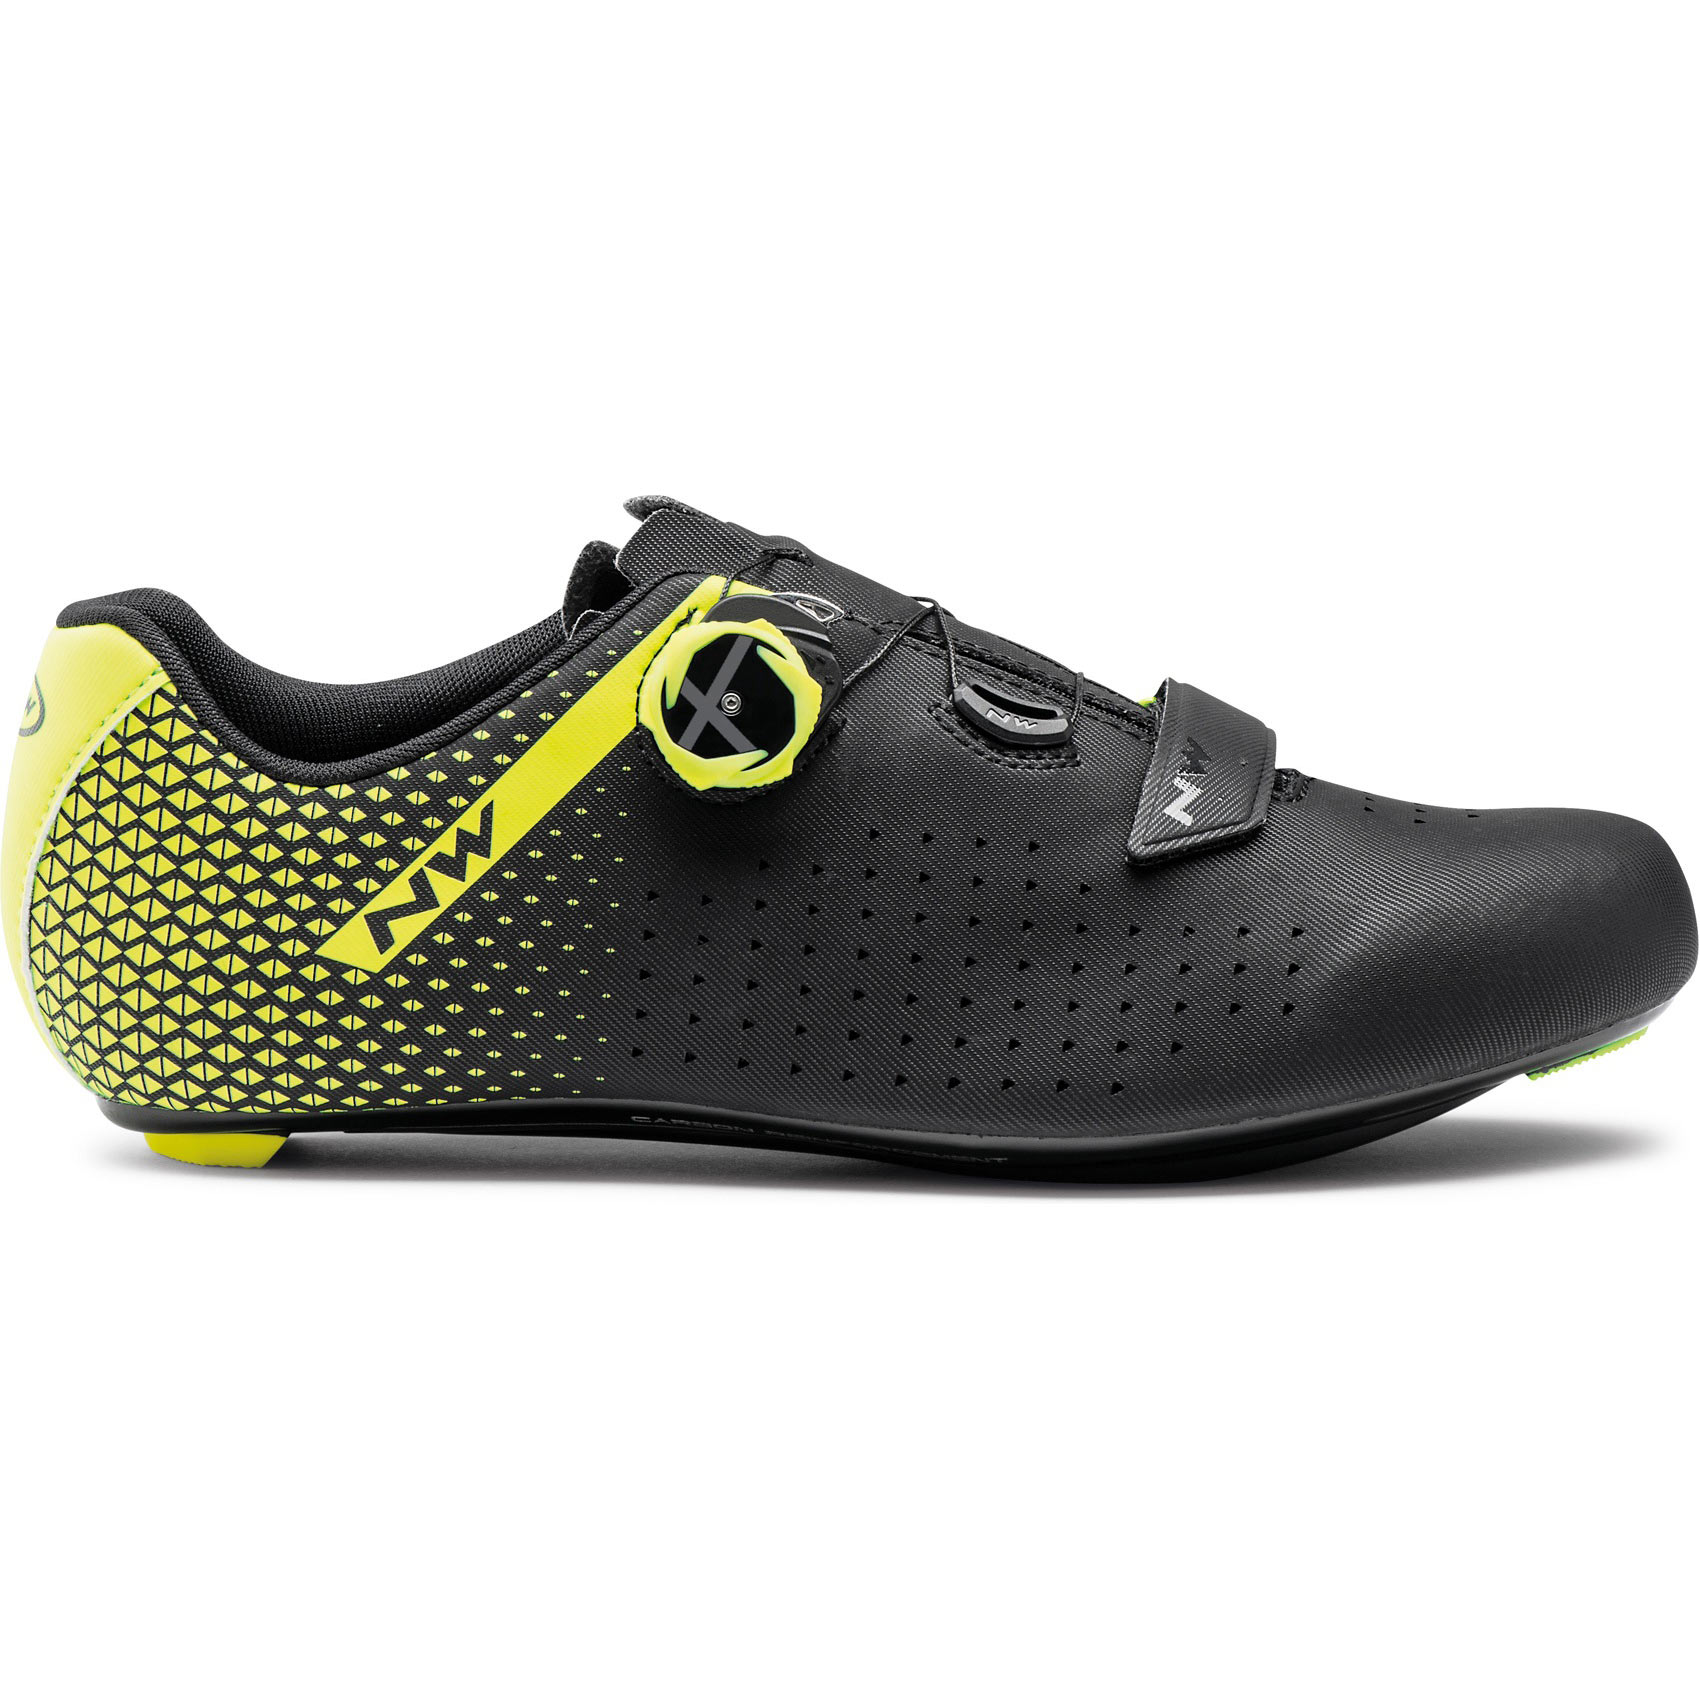 Picture of Northwave Core Plus 2 Road Shoes - black/yellow fluo 04